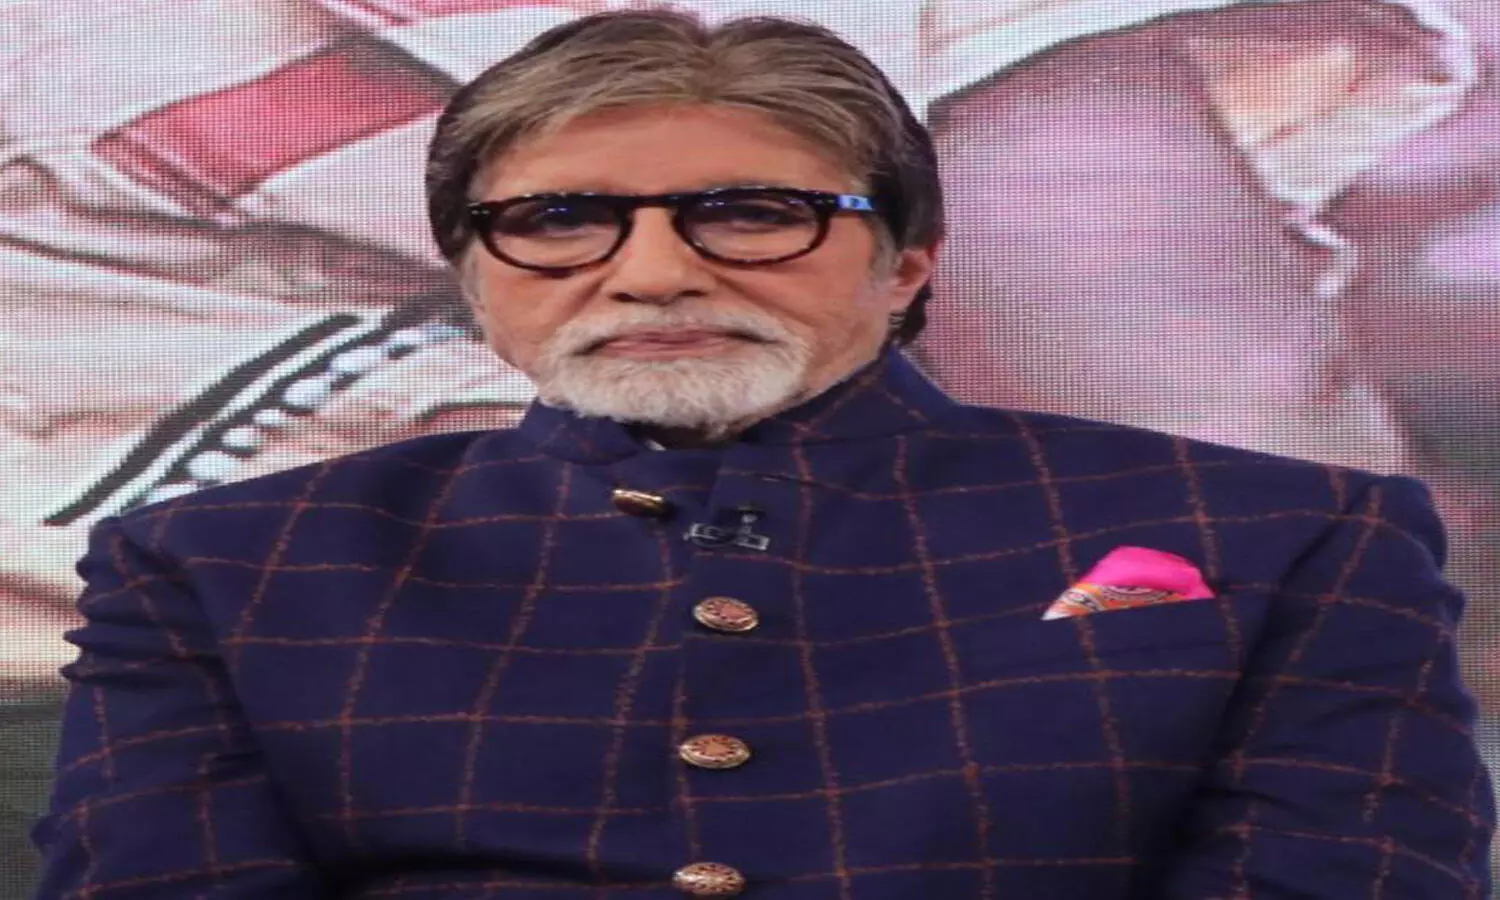 Amitabh Bachchan goes into rhyming mode as he updates fans about his work schedule